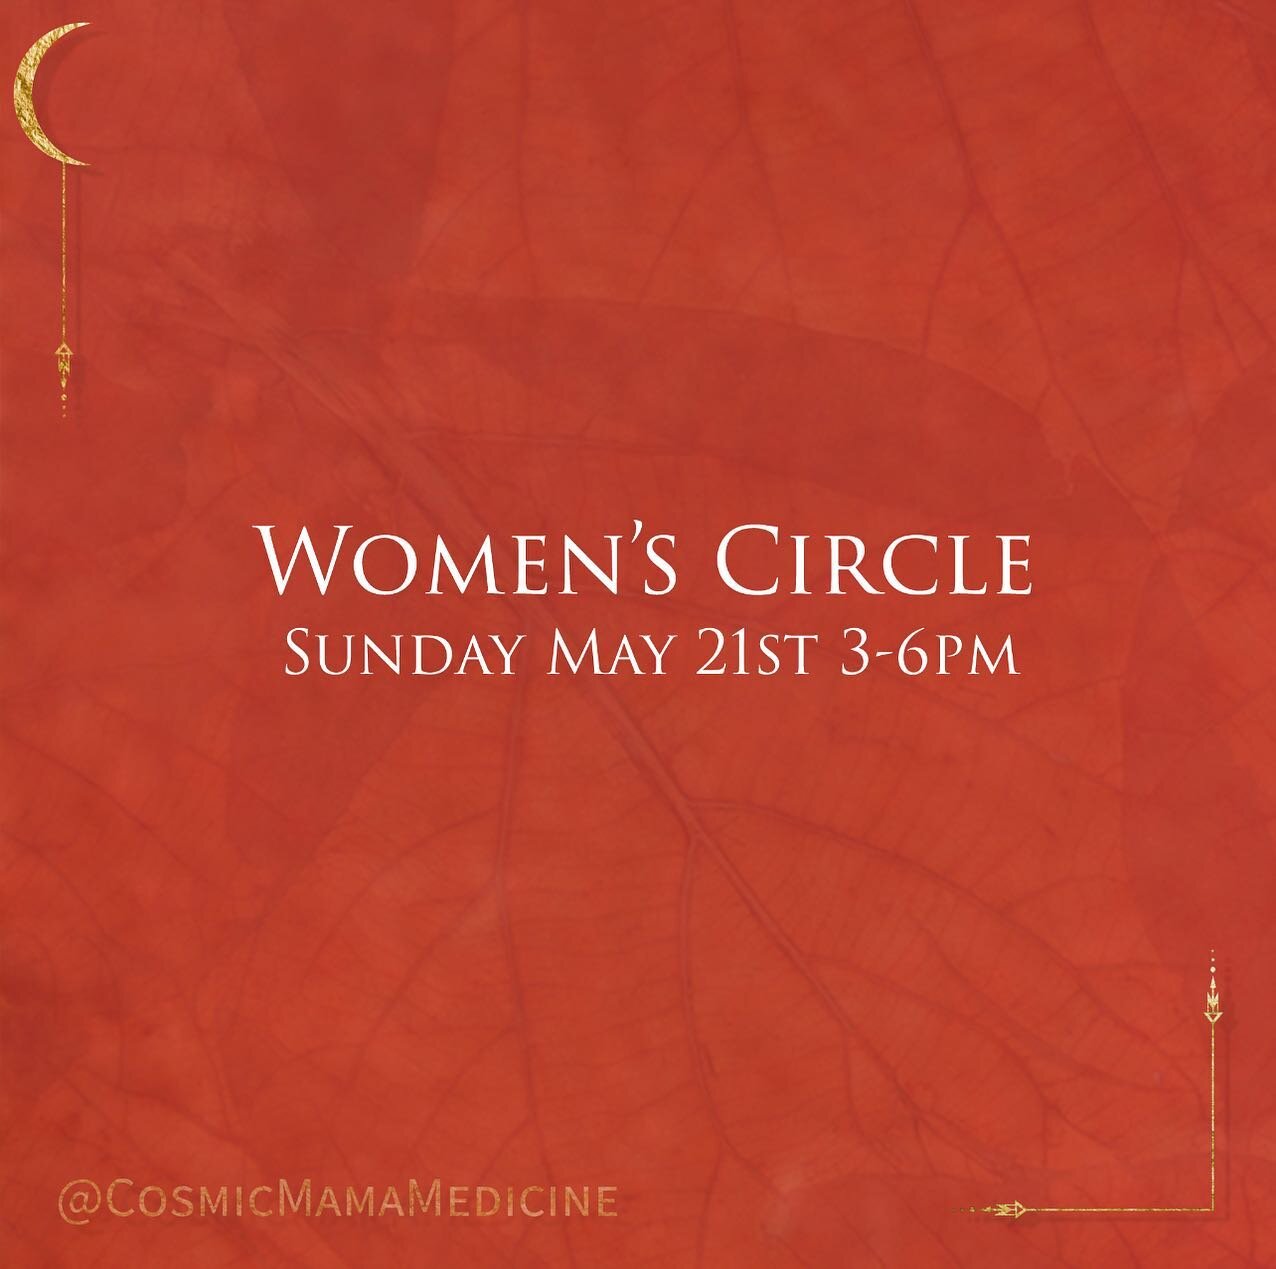 Let us gather, sing, connect, open our hearts and truly be seen in Sisterhood. DM me to RSVP